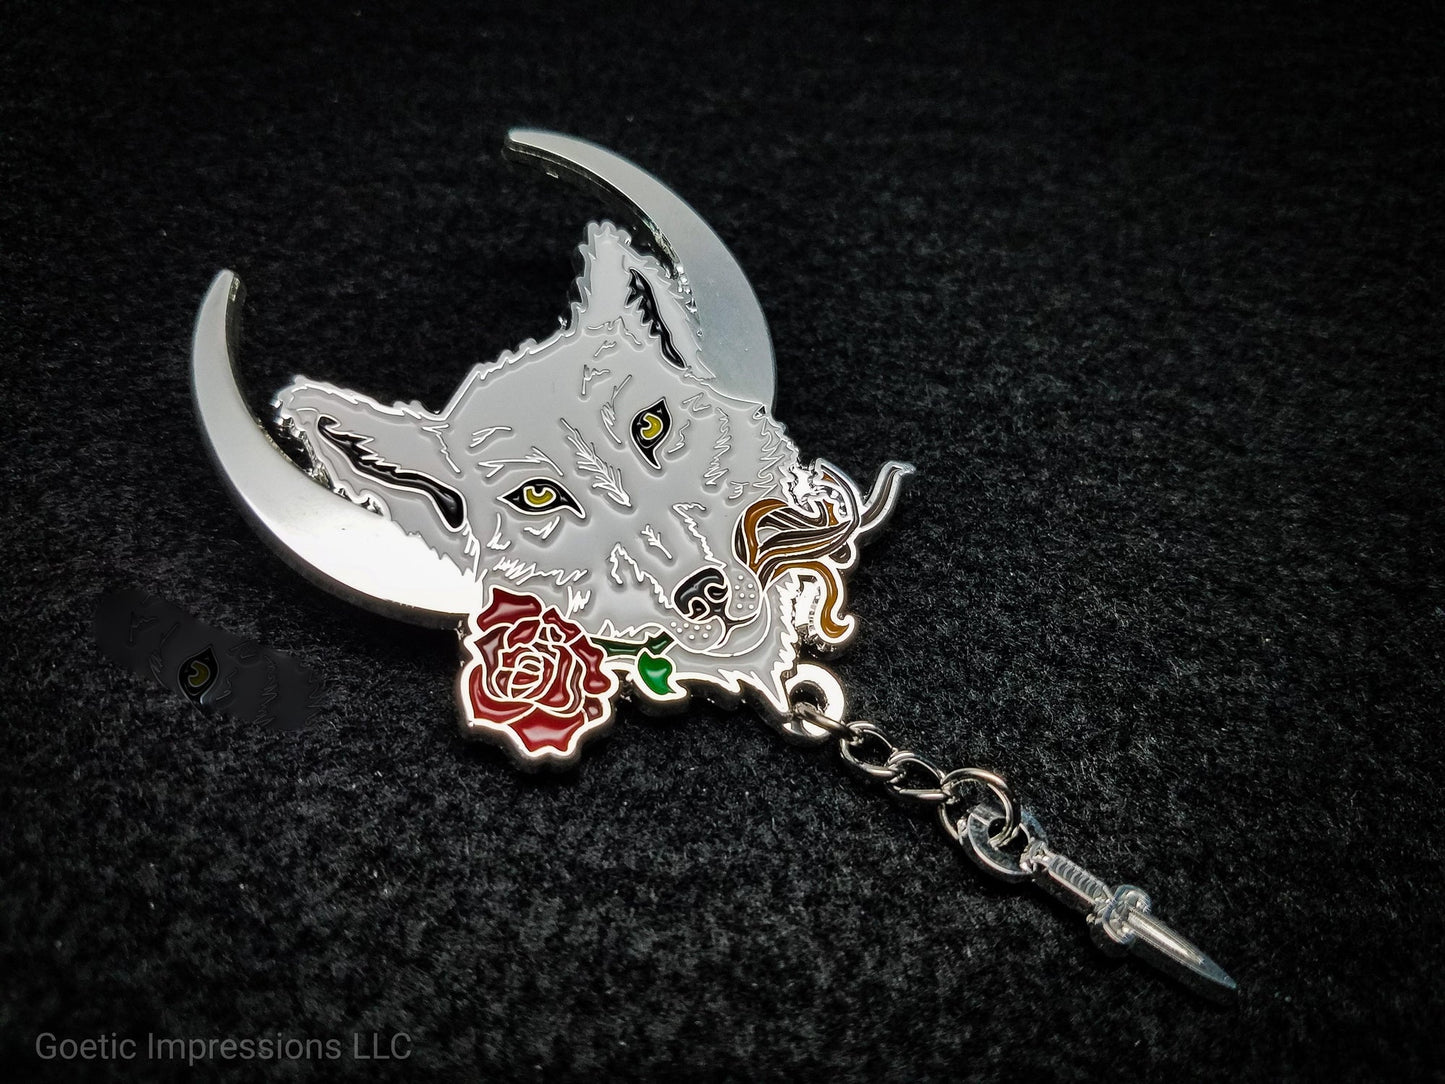 Lupercalia pin featuring a white wolf with a crescent moon in the background. The wolf is holding a rose, leather strips and has a chain with a dagger attached to it. It is plated in silver.